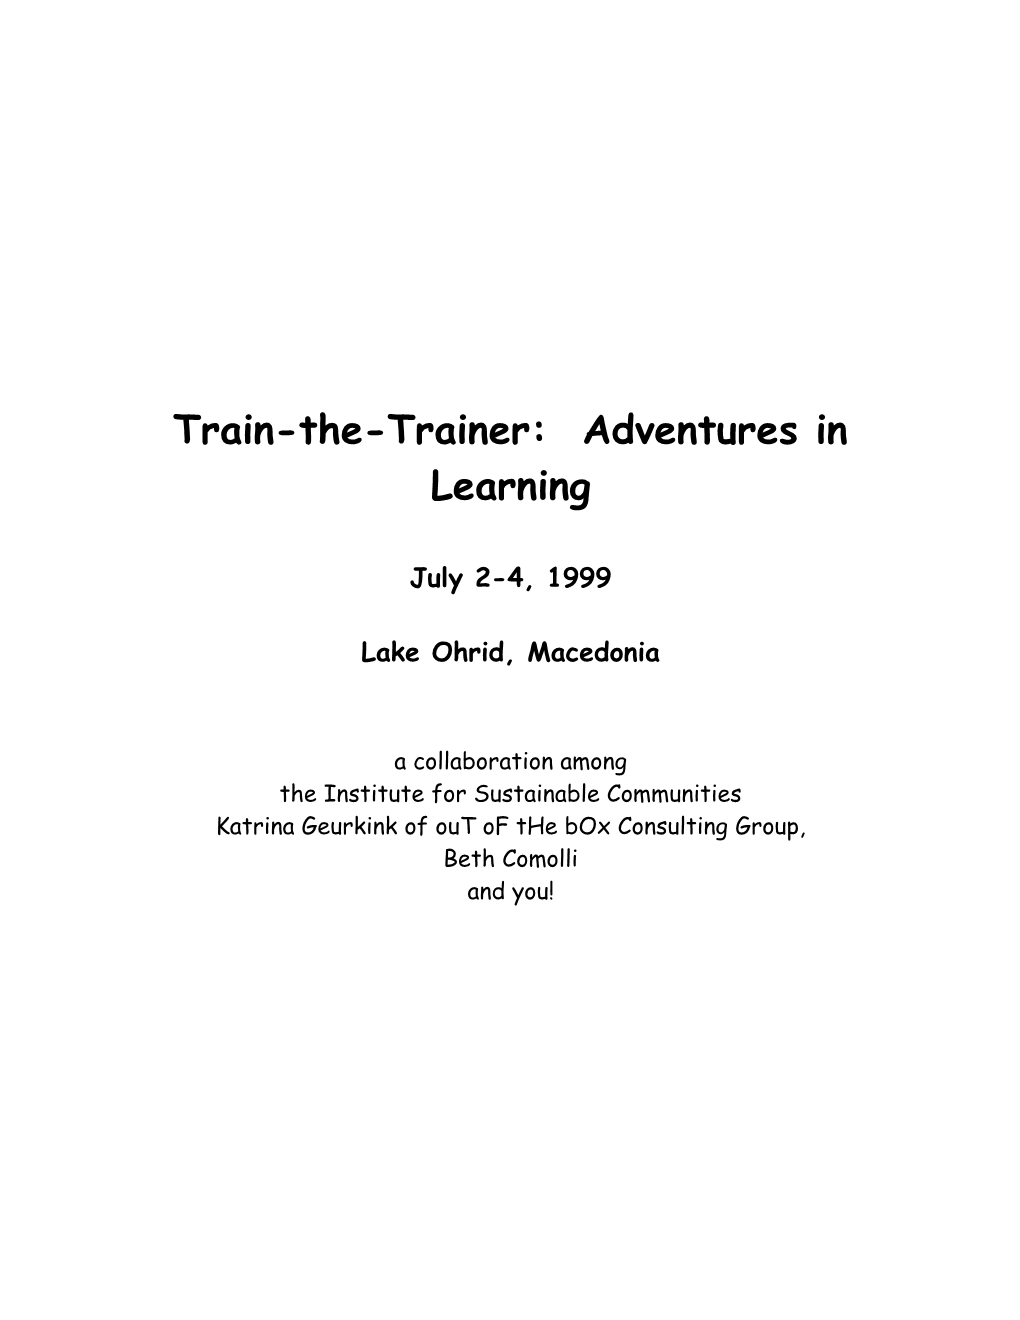 Train-The-Trainer: Adventures in Learning